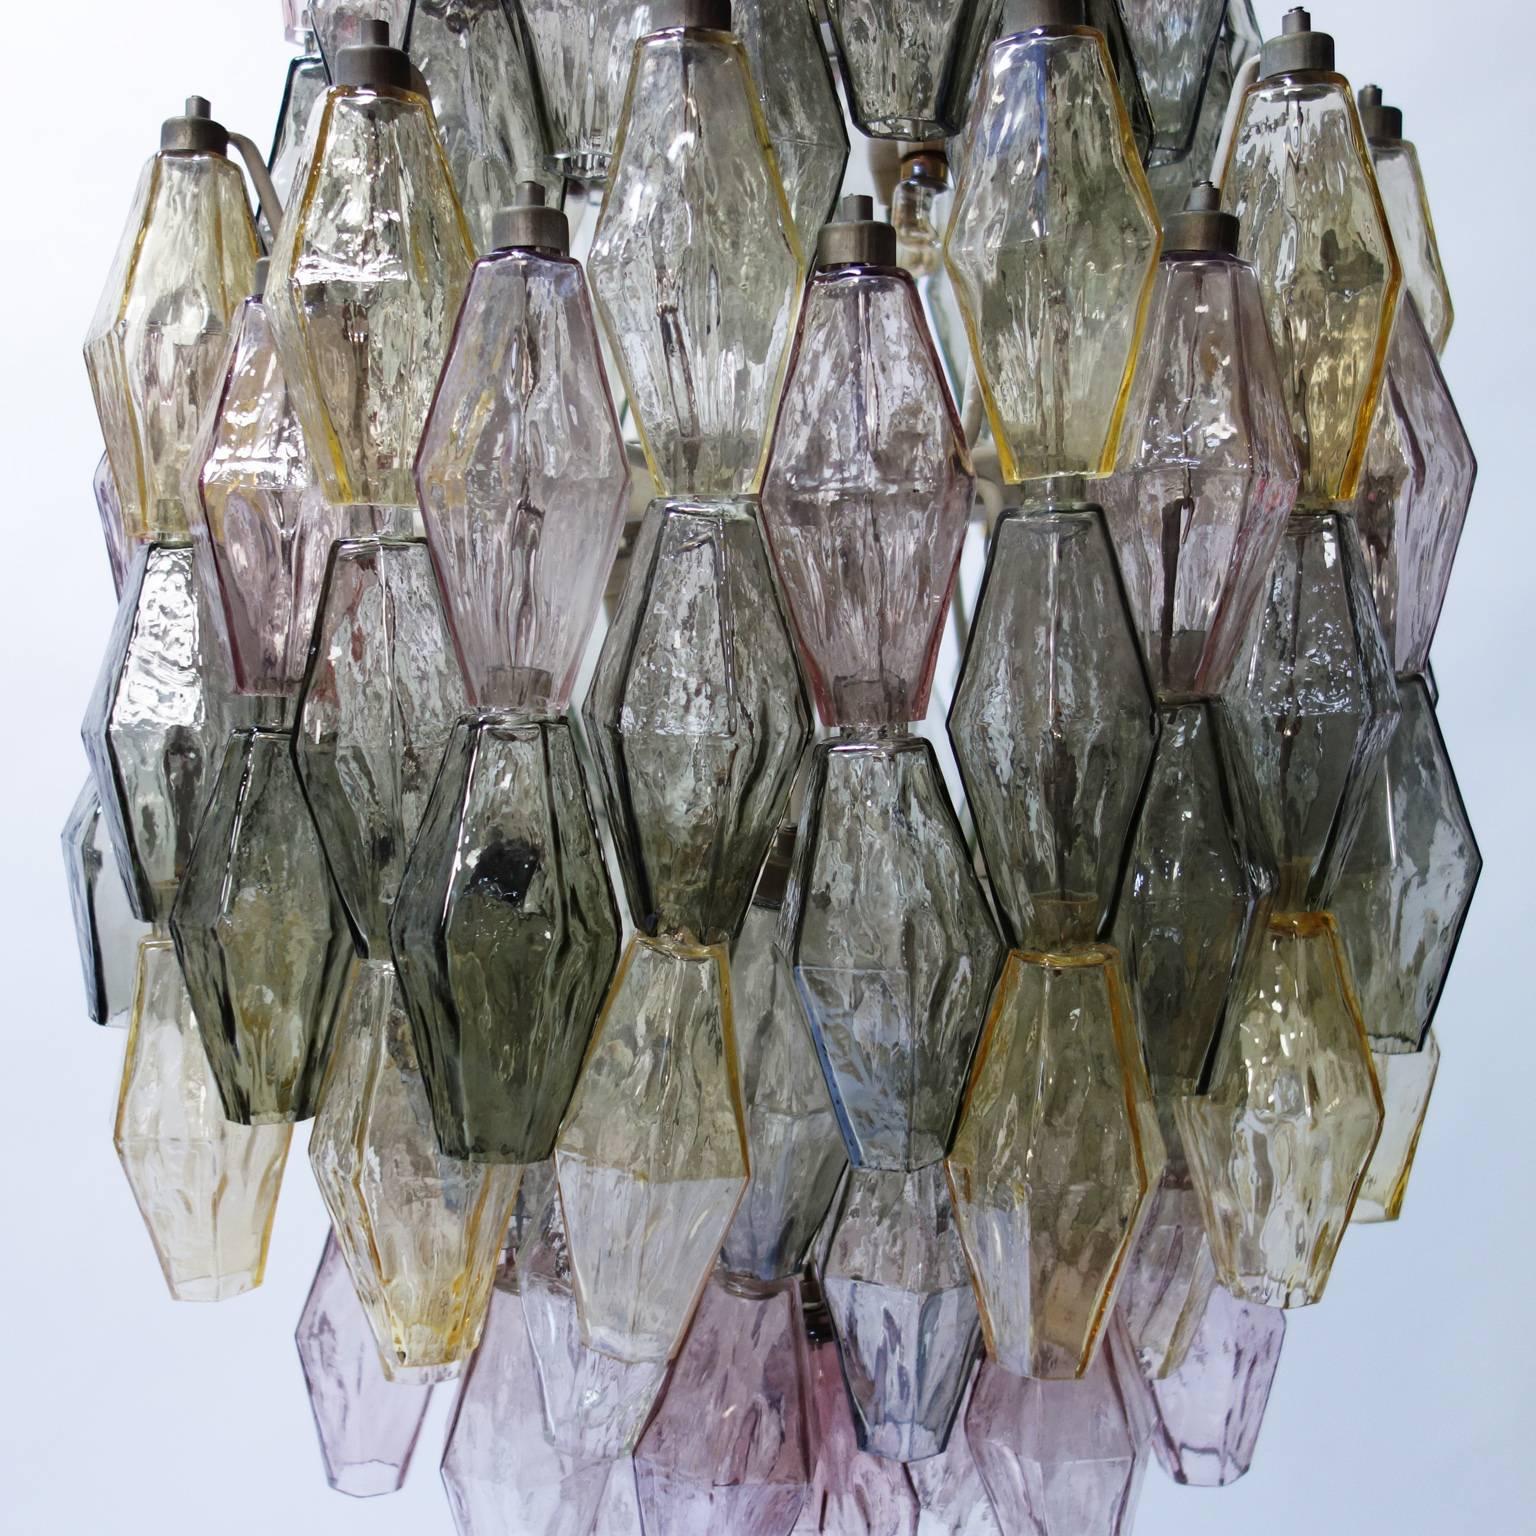 A large Venini chandelier with polyhedral Murano glass elements hanging at several levels from four metal tiers. 

Inside there are small light bulbs.
This lamp was designed by Carlo Scarpa, circa 1958, and is in a great and fully original